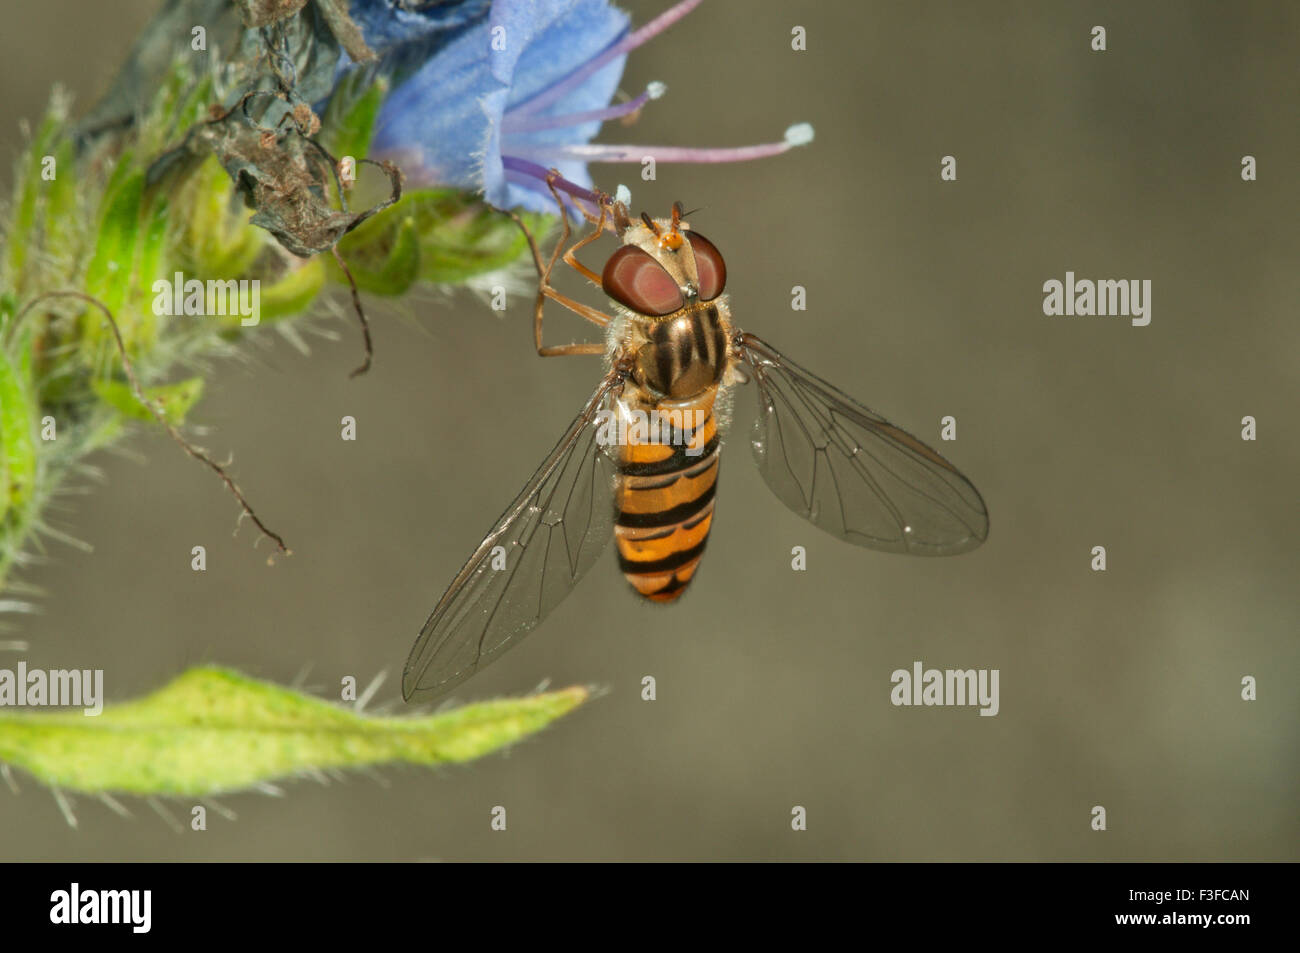 Marmalade hoverfly (Episyrphus balteatus) female, looking for nectar on Viper's Bugloss or Blueweed (Echium vulgare) Stock Photo